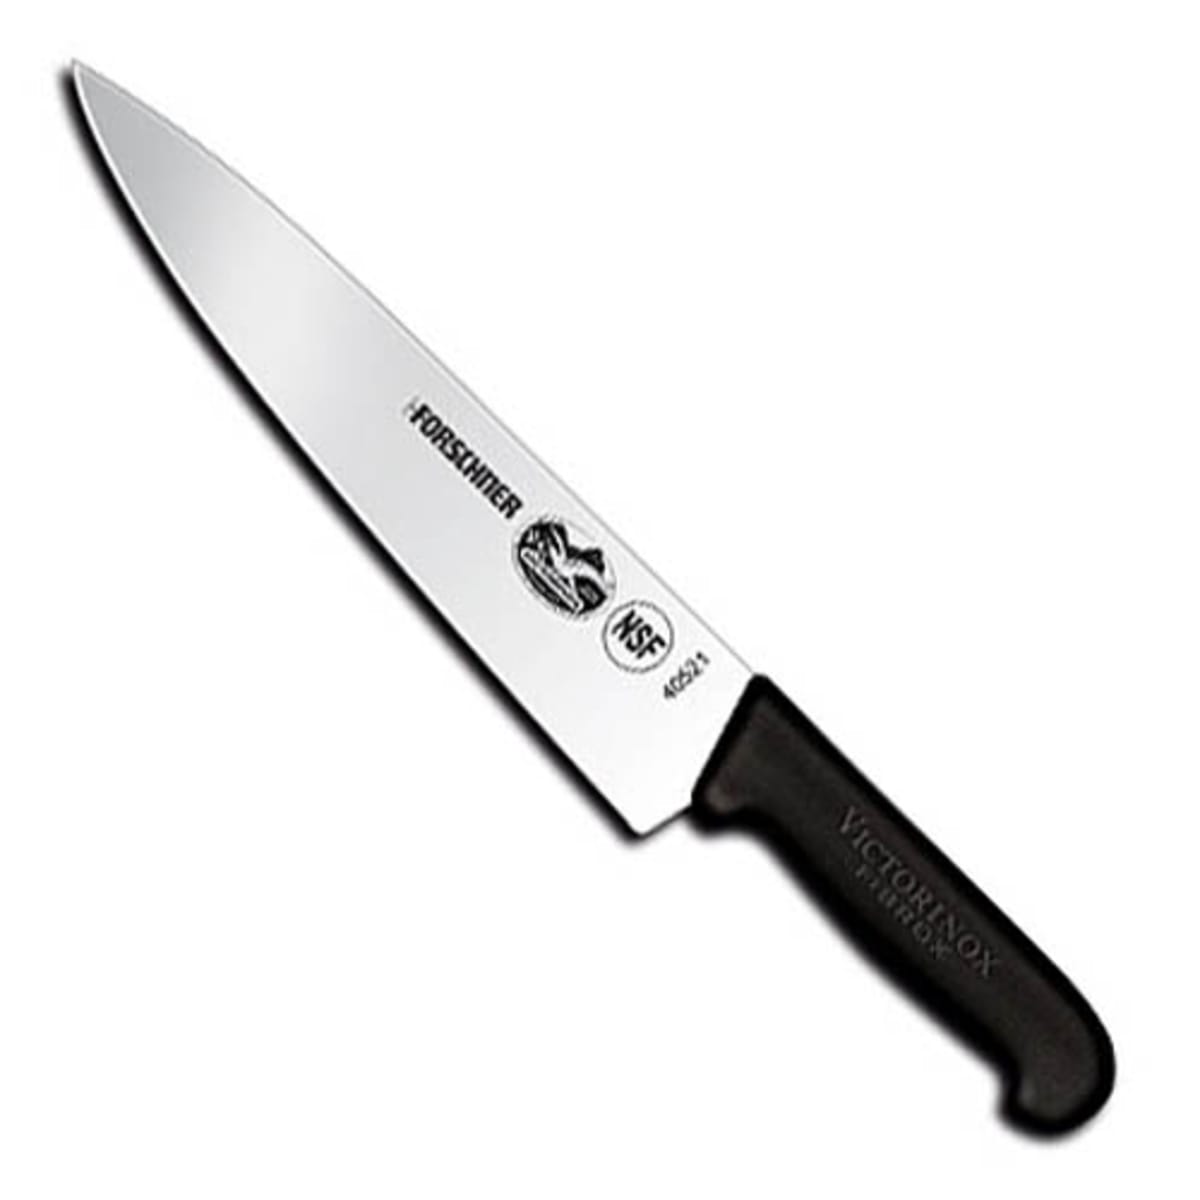 Victorinox- Chef's Knife 10 Radius Blade, Blunt Tip for Safety